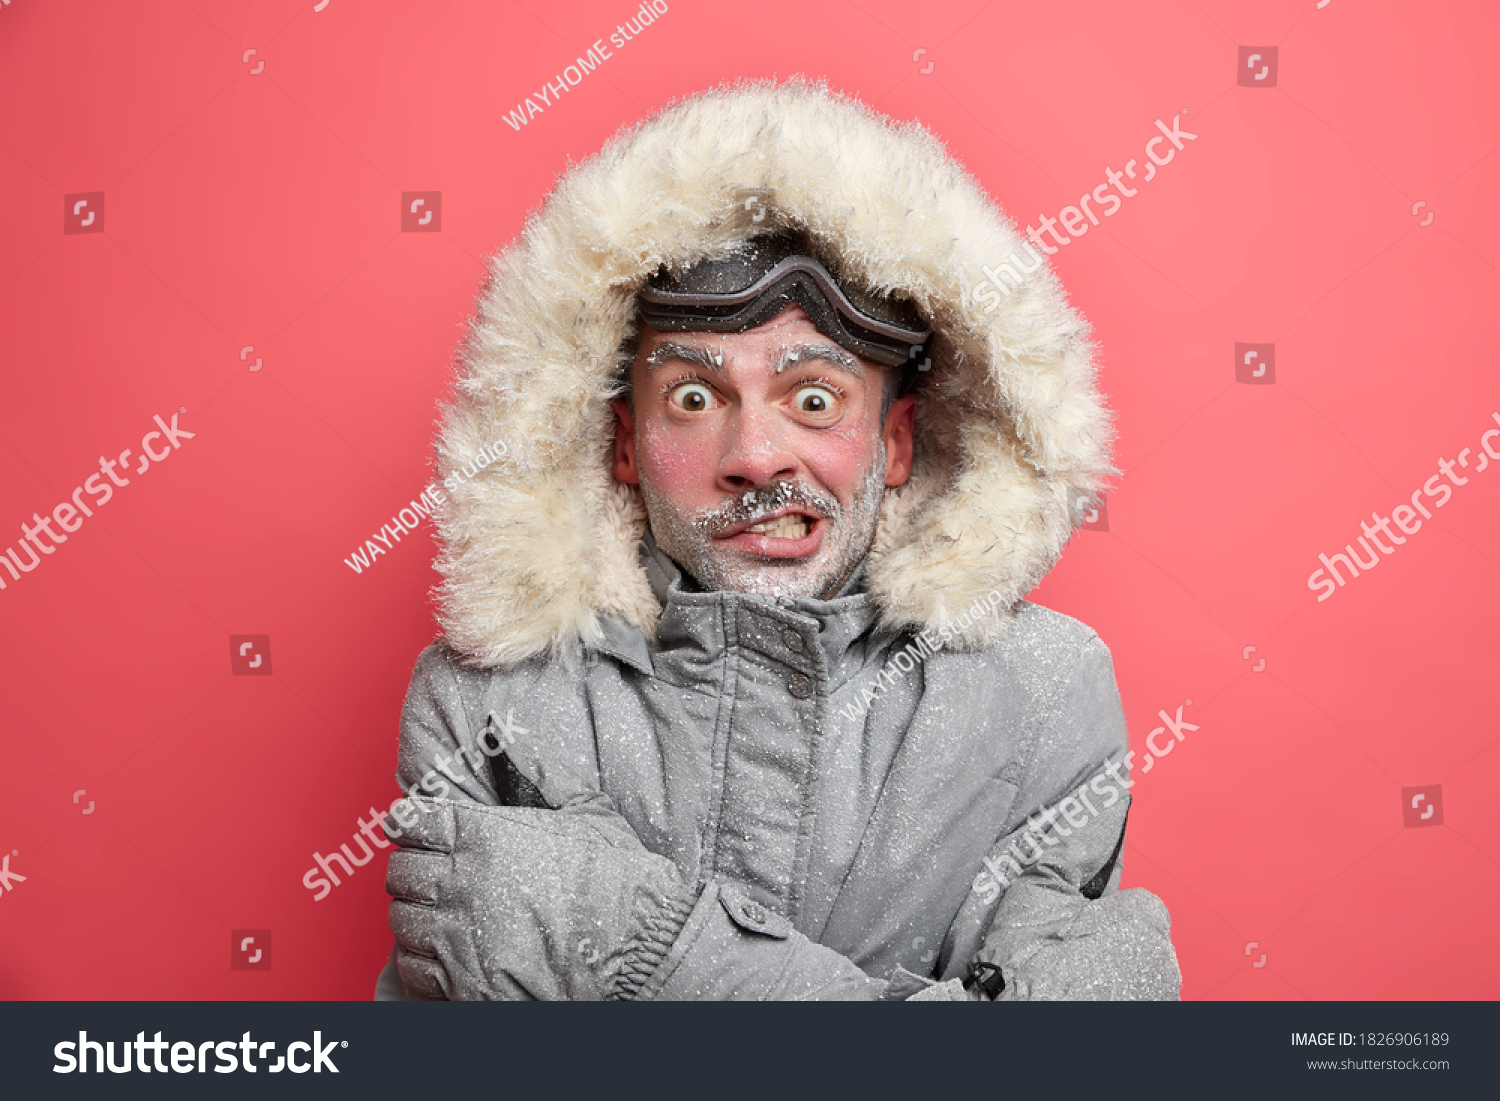 Frozen man trembles from cold has red face covered by ice frosted beard wears jacket with hood needs to warm during winter expedition poses over coral background. Cold weather low temperature #1826906189